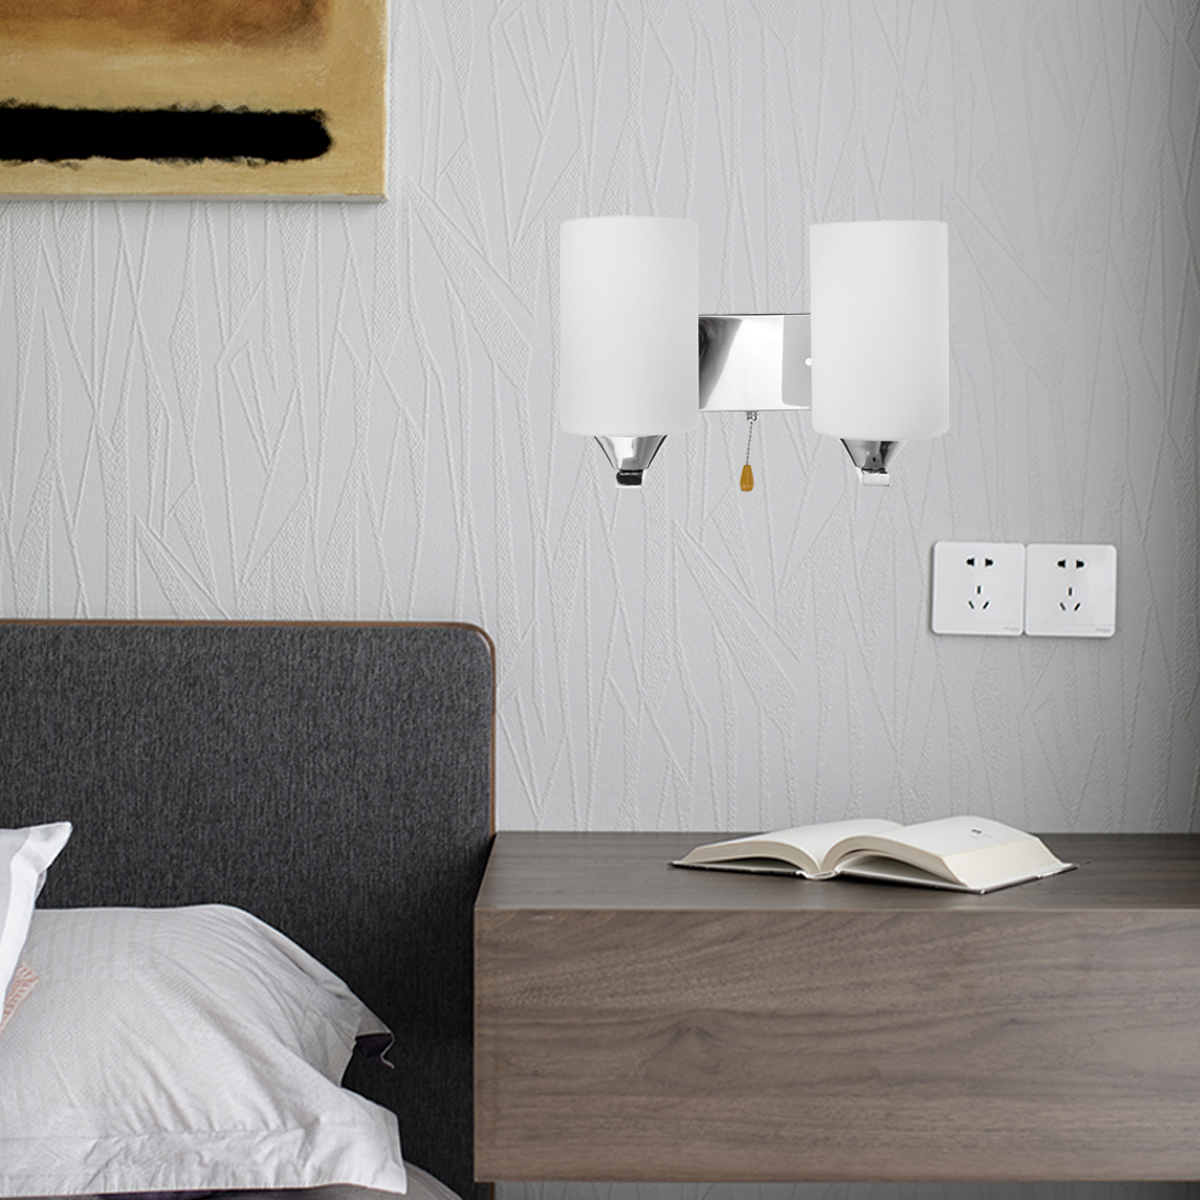 Bedroom-Glass-Wall-Sconce-Light-Indoor-Fixture-Bedside-LampLED-Bulb-Pull-Switch-1763737-5